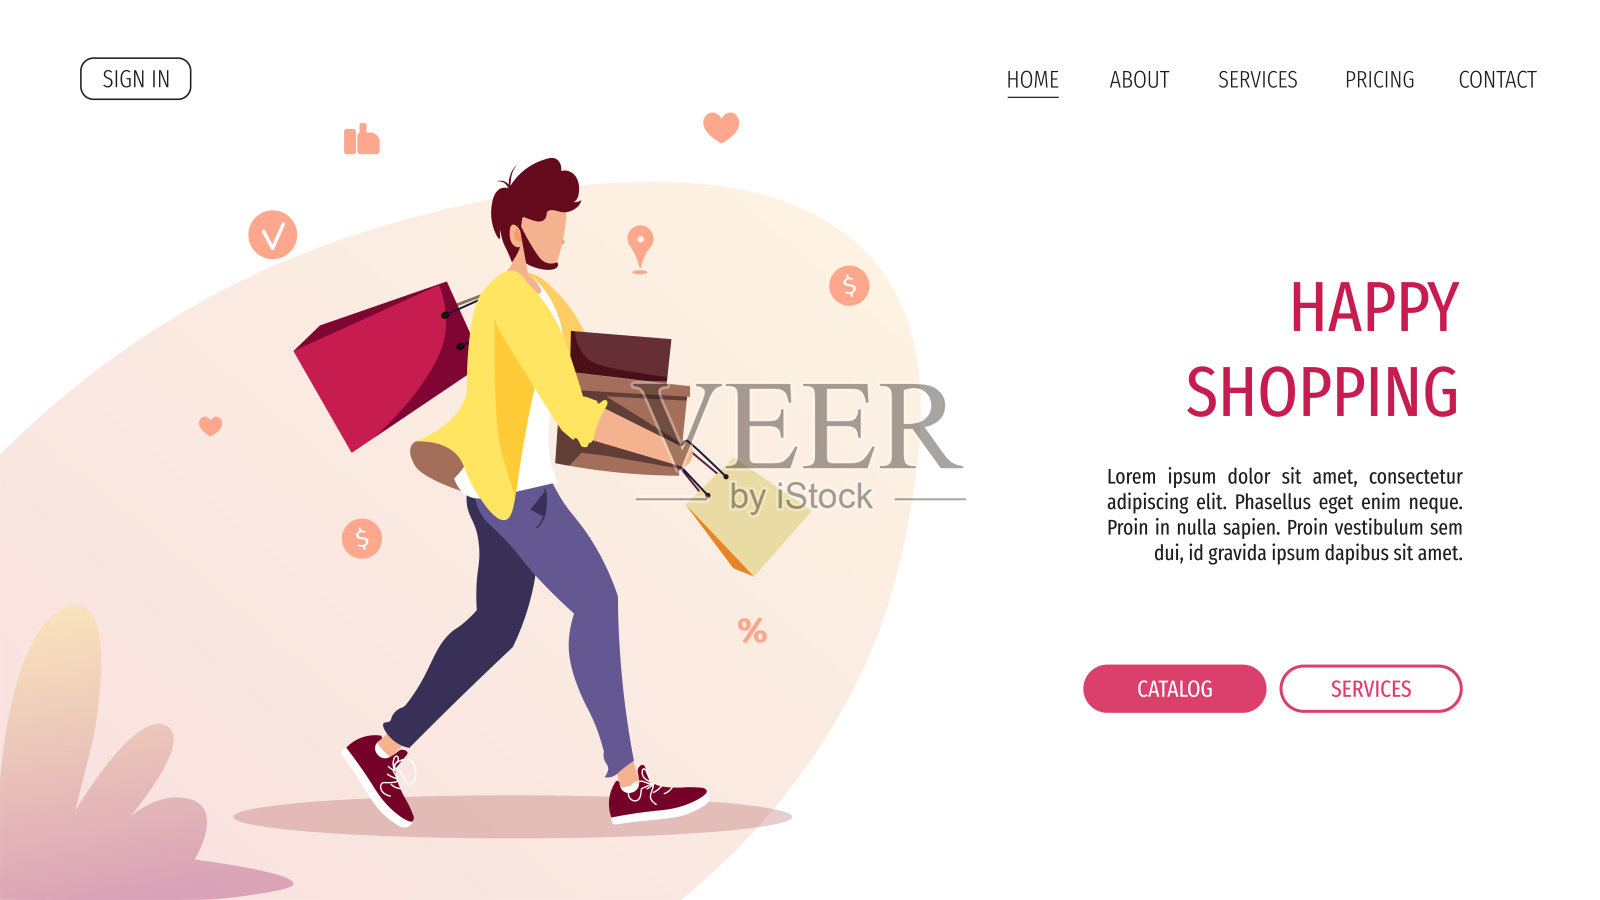 Man with purchases. Online Shopping, Store, E-commerce, Sale concept.设计模板素材